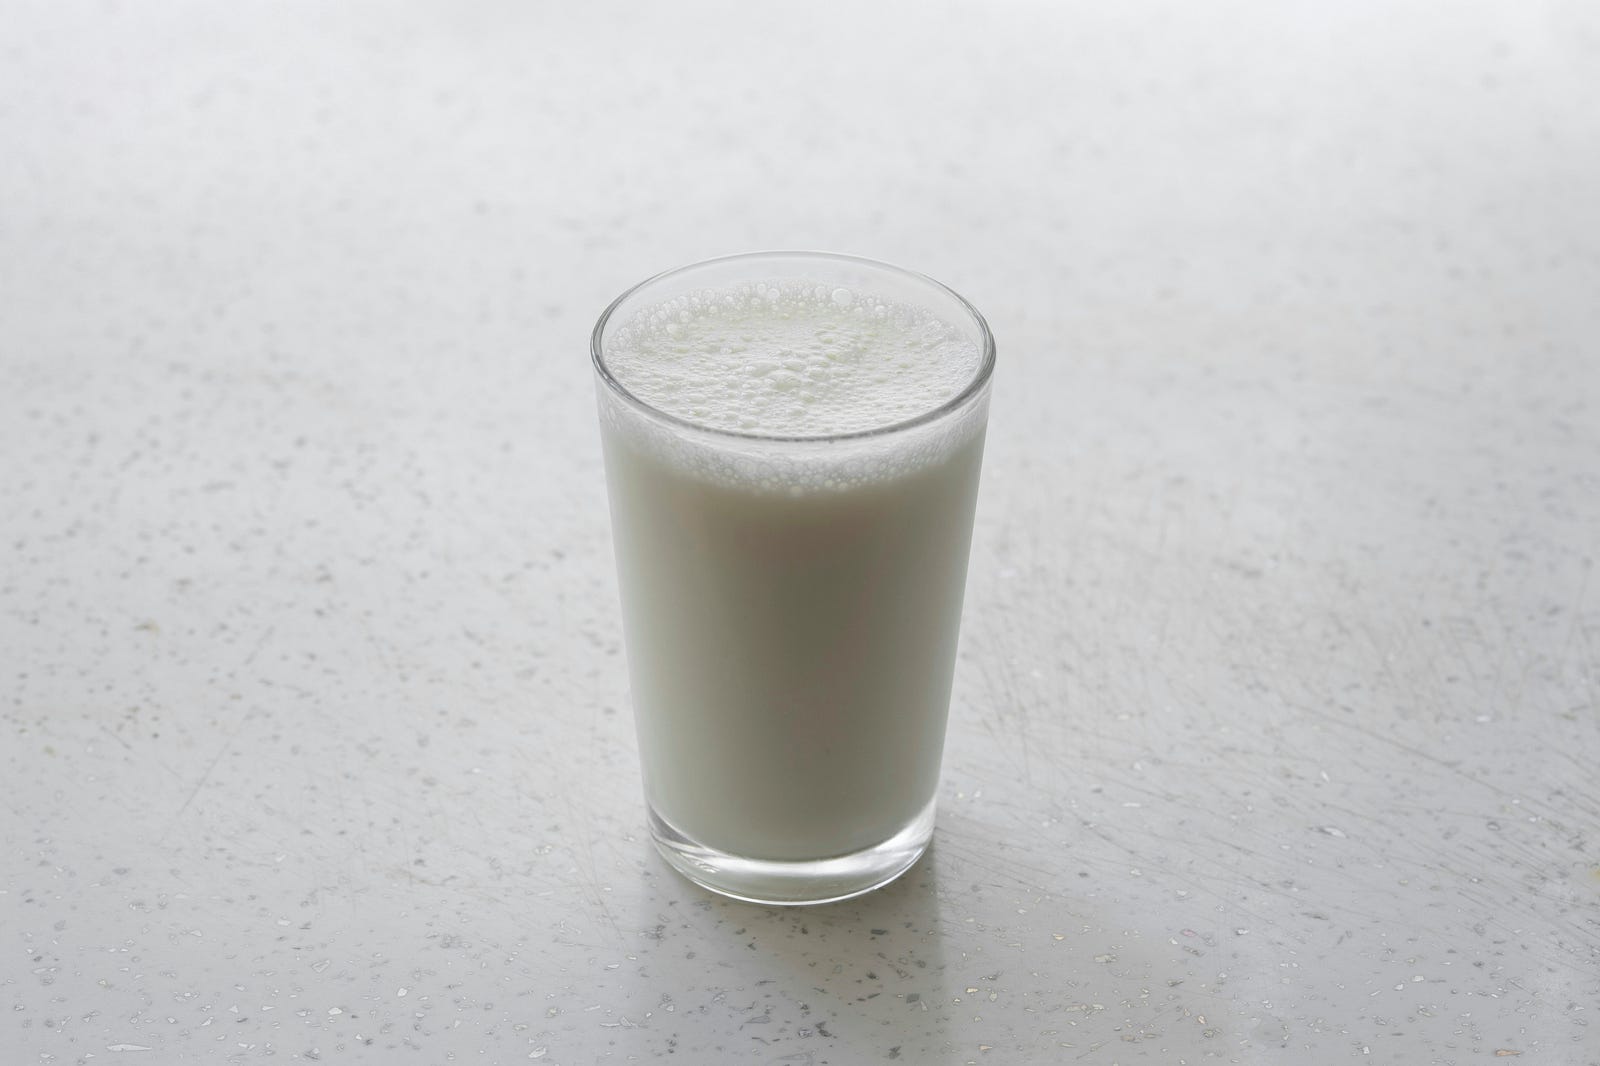 A glass of milk. Fortified milk is rich in vitamin D.